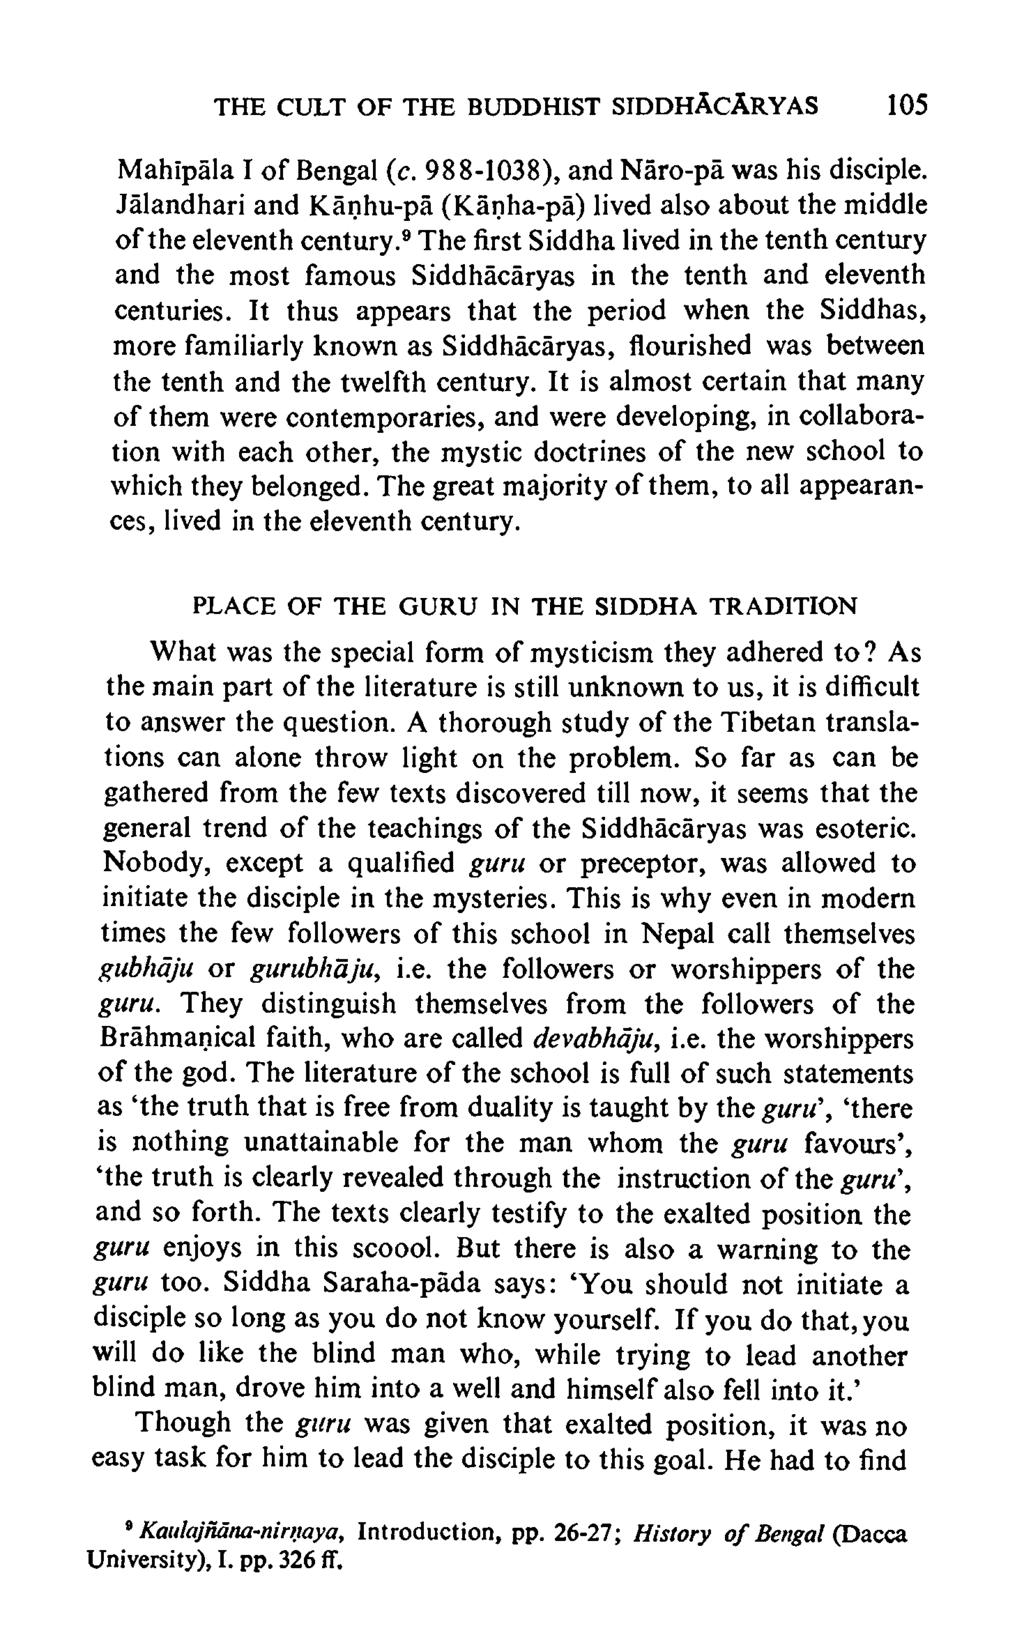 THE CULT OF THE BUDDHIST SIDDHAcARYAS 105 Mahlpala I of Bengal (c. 988-1038), and Naro-pa was his disciple. Jalandhari and Kanhu-pa (Kanha-pa) lived also about the middle o f the eleventh century.